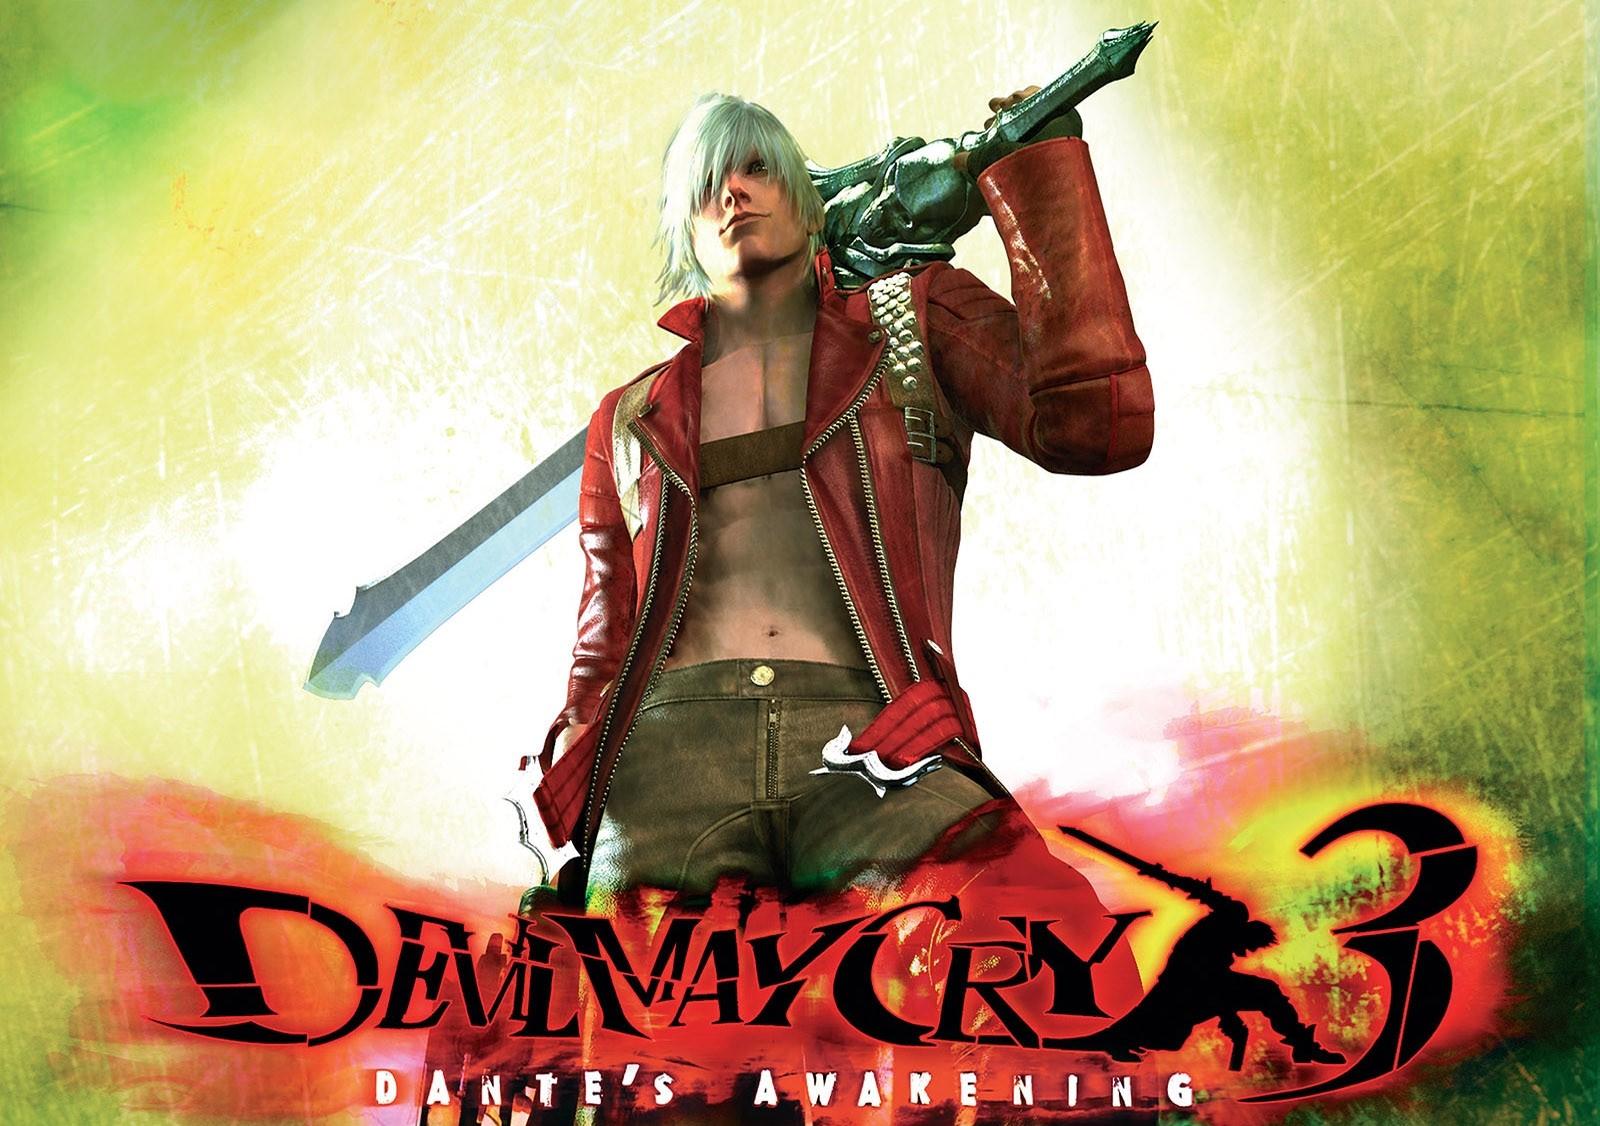 Devil may cry 3 steam not found фото 81